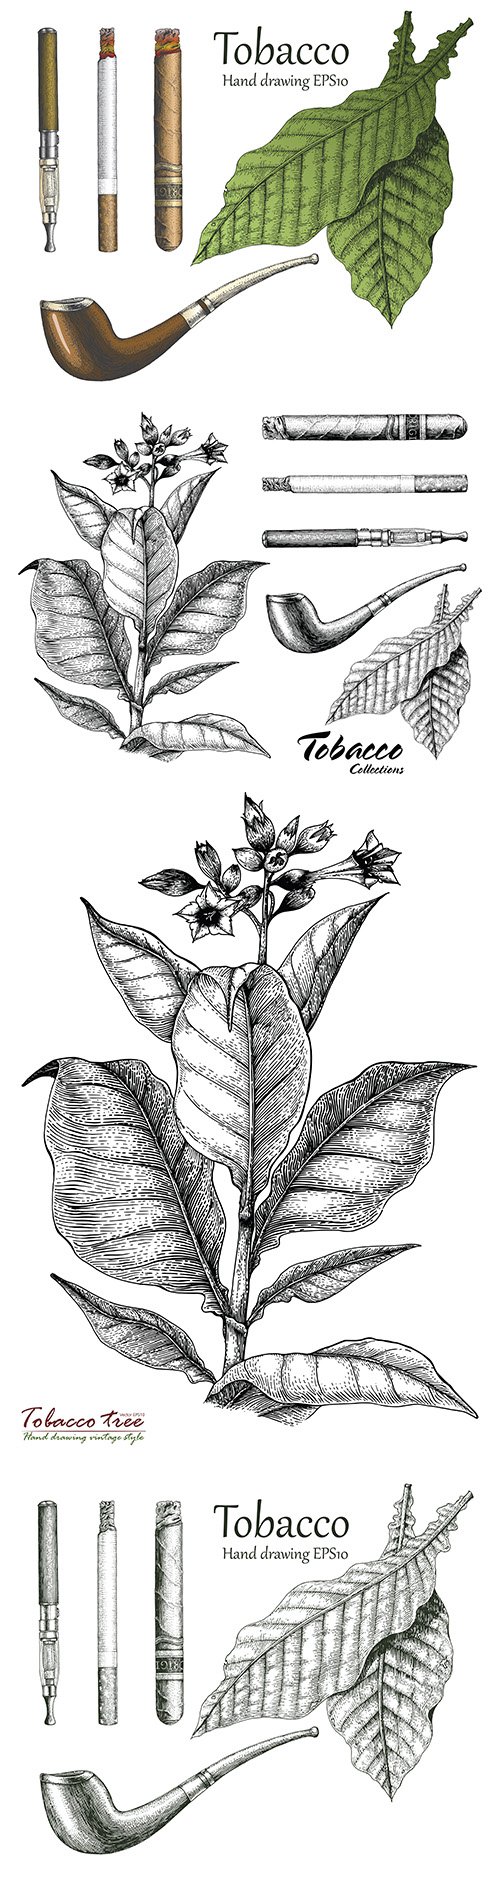 Tobacco collection hand-drawn in vintage style